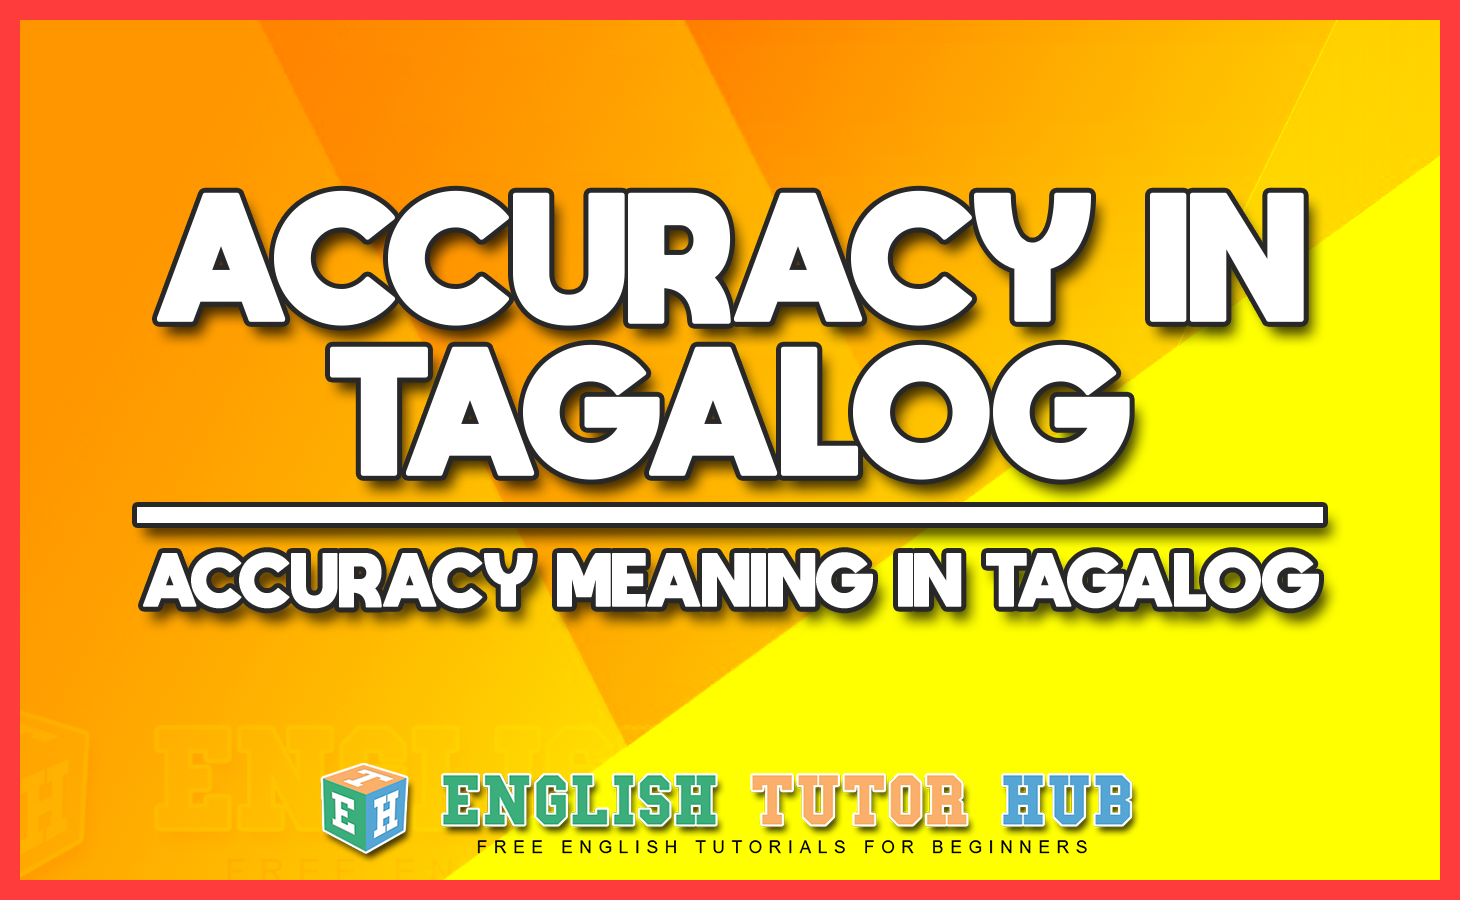 ACCURACY IN TAGALOG - ACCURACY MEANING IN TAGALOG